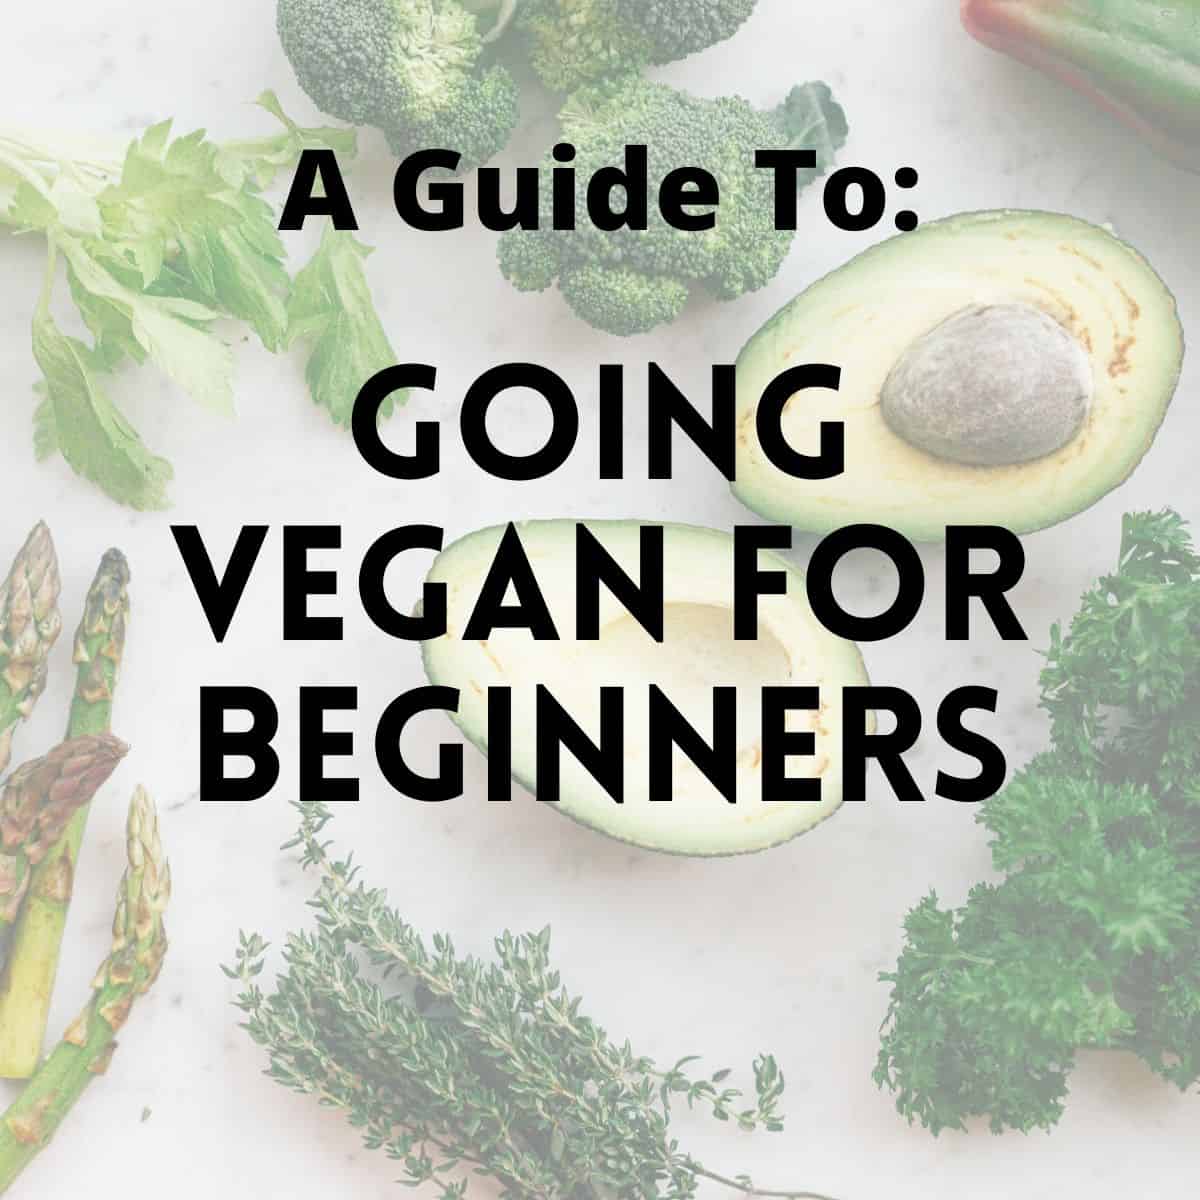 Thinking About Going Vegan? Here's a Vegan Beginner's Guide